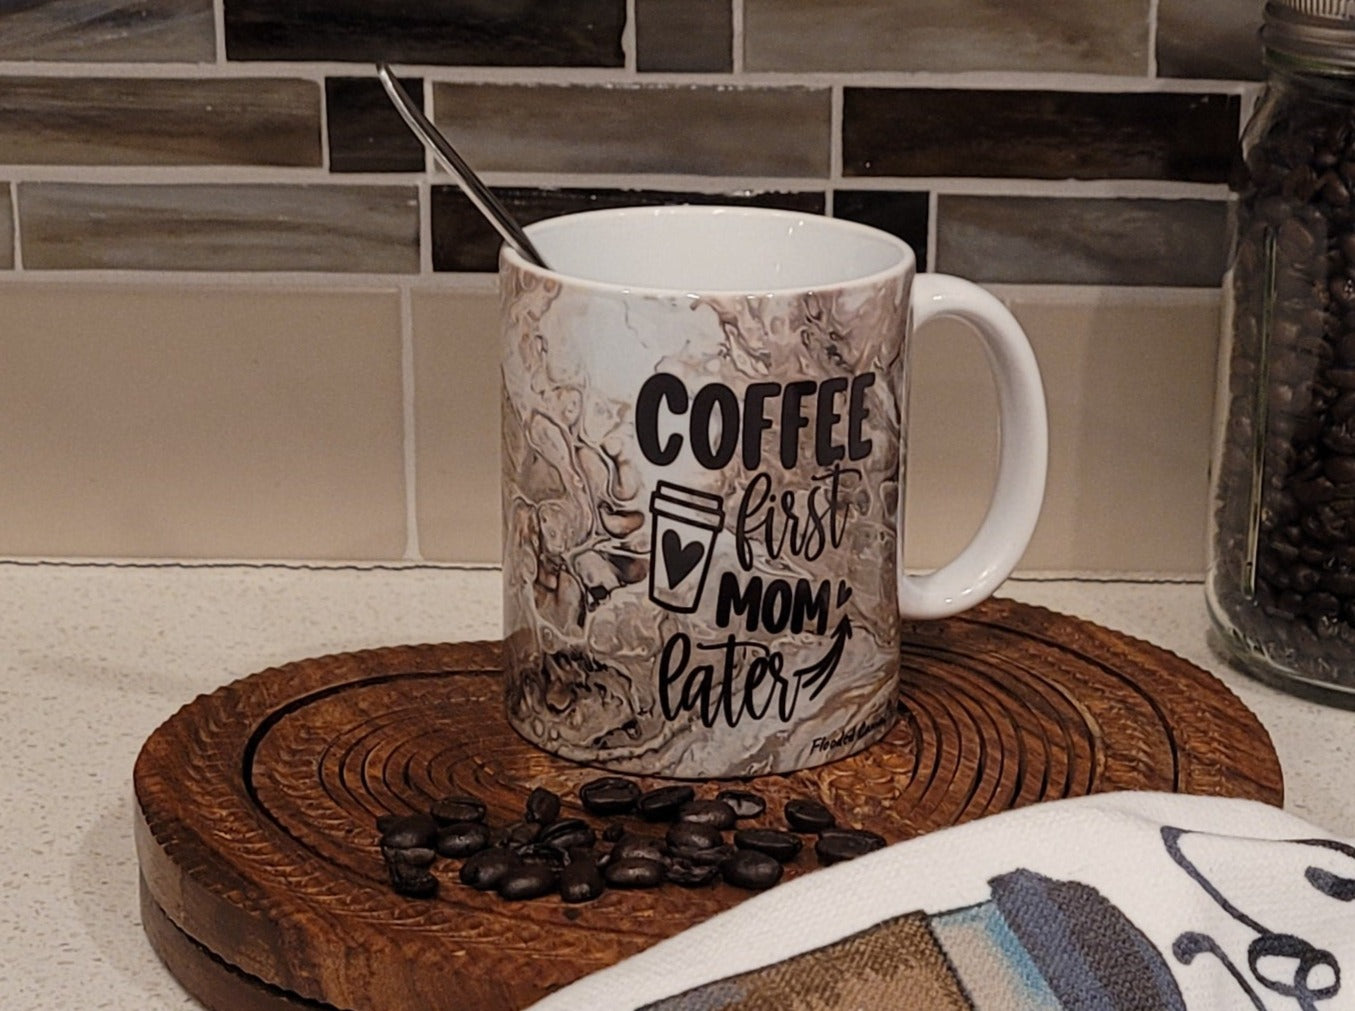 Mother's Day Coffee Mugs with Brown Abstract Art Design, Coffee First Mom Later, Super Mom Super Wife Super Tired